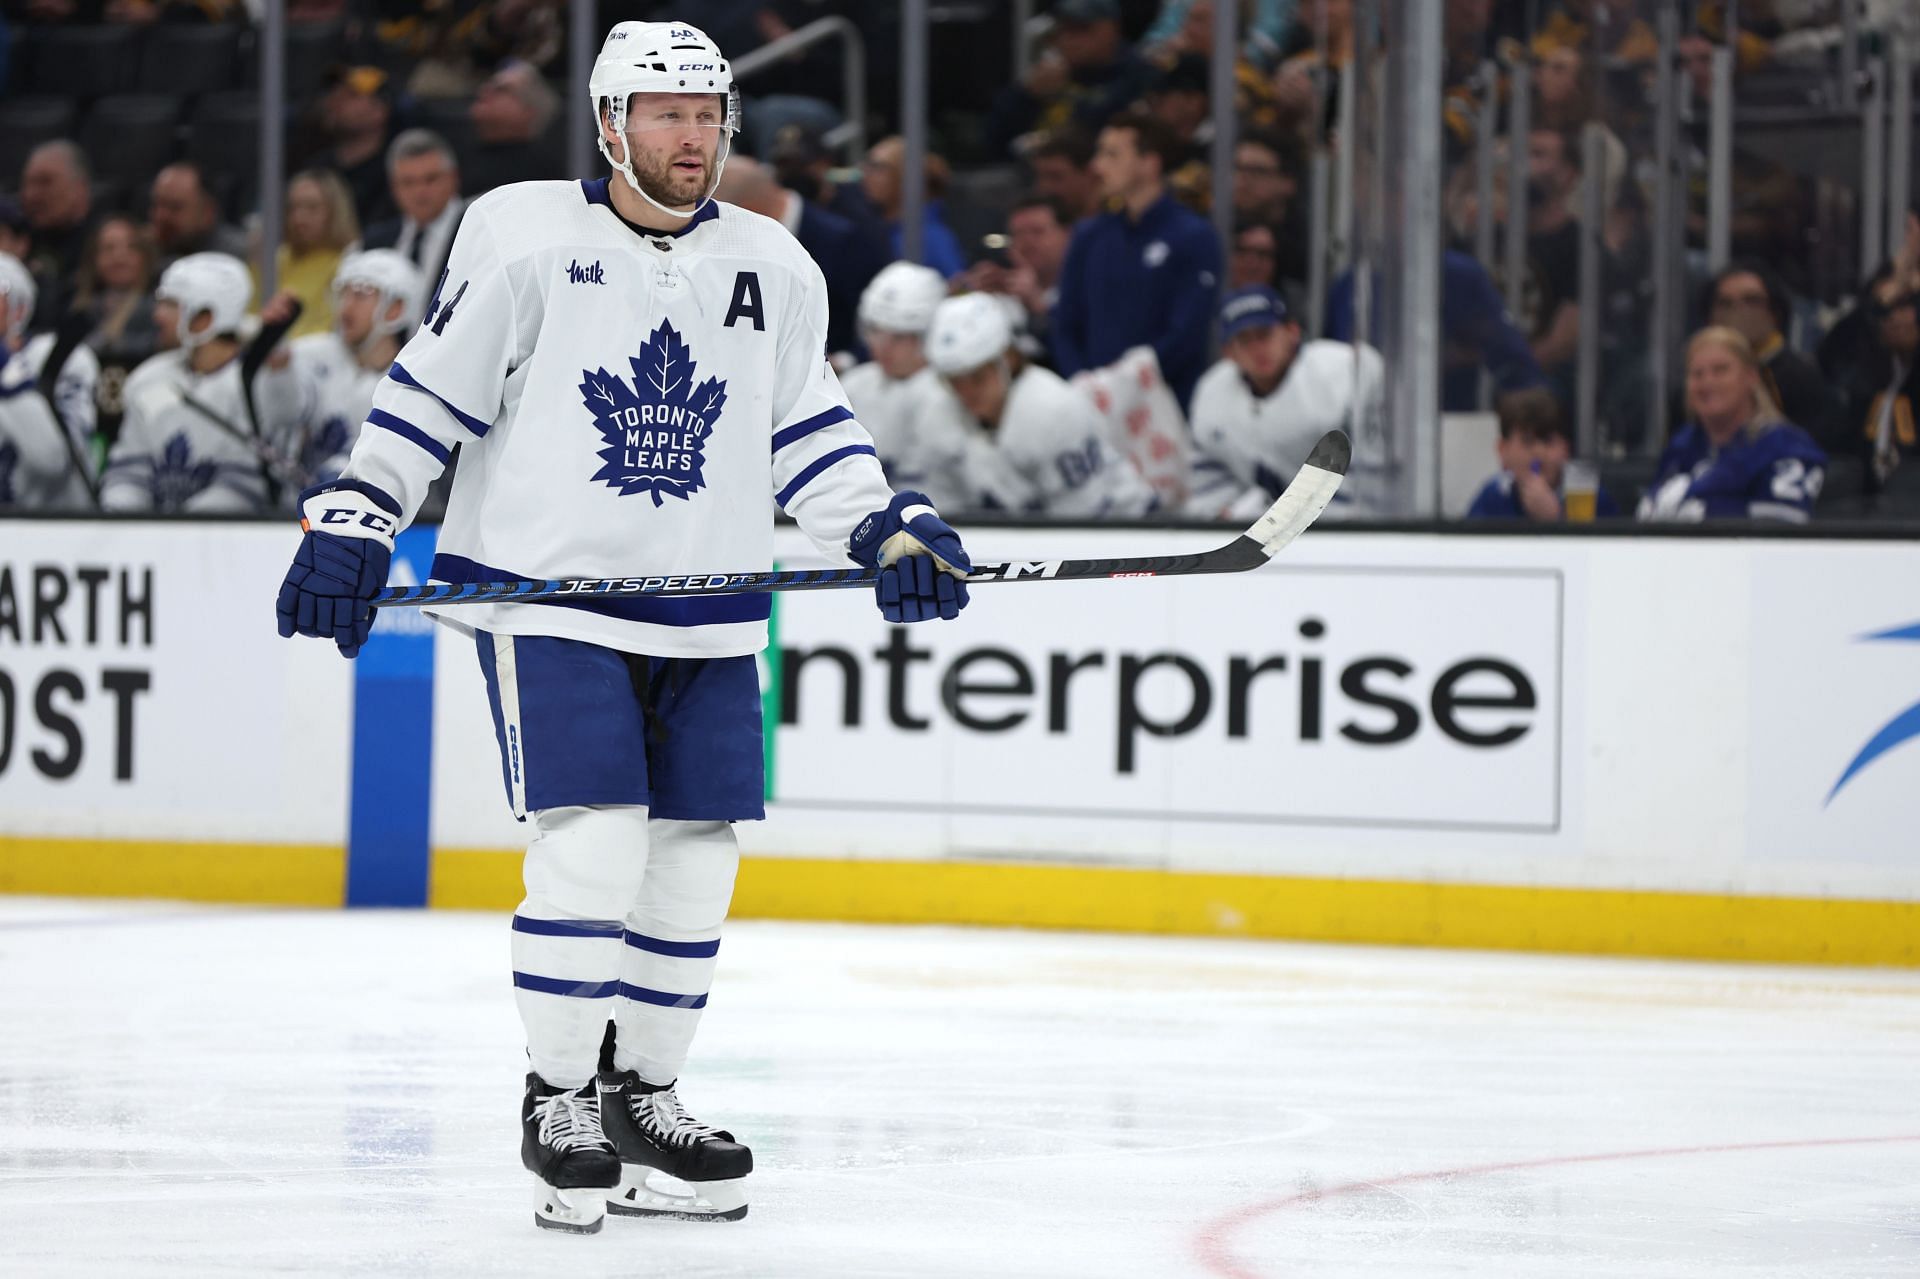 Morgan Rielly is among the nominees for the King Clancy Trophy this year